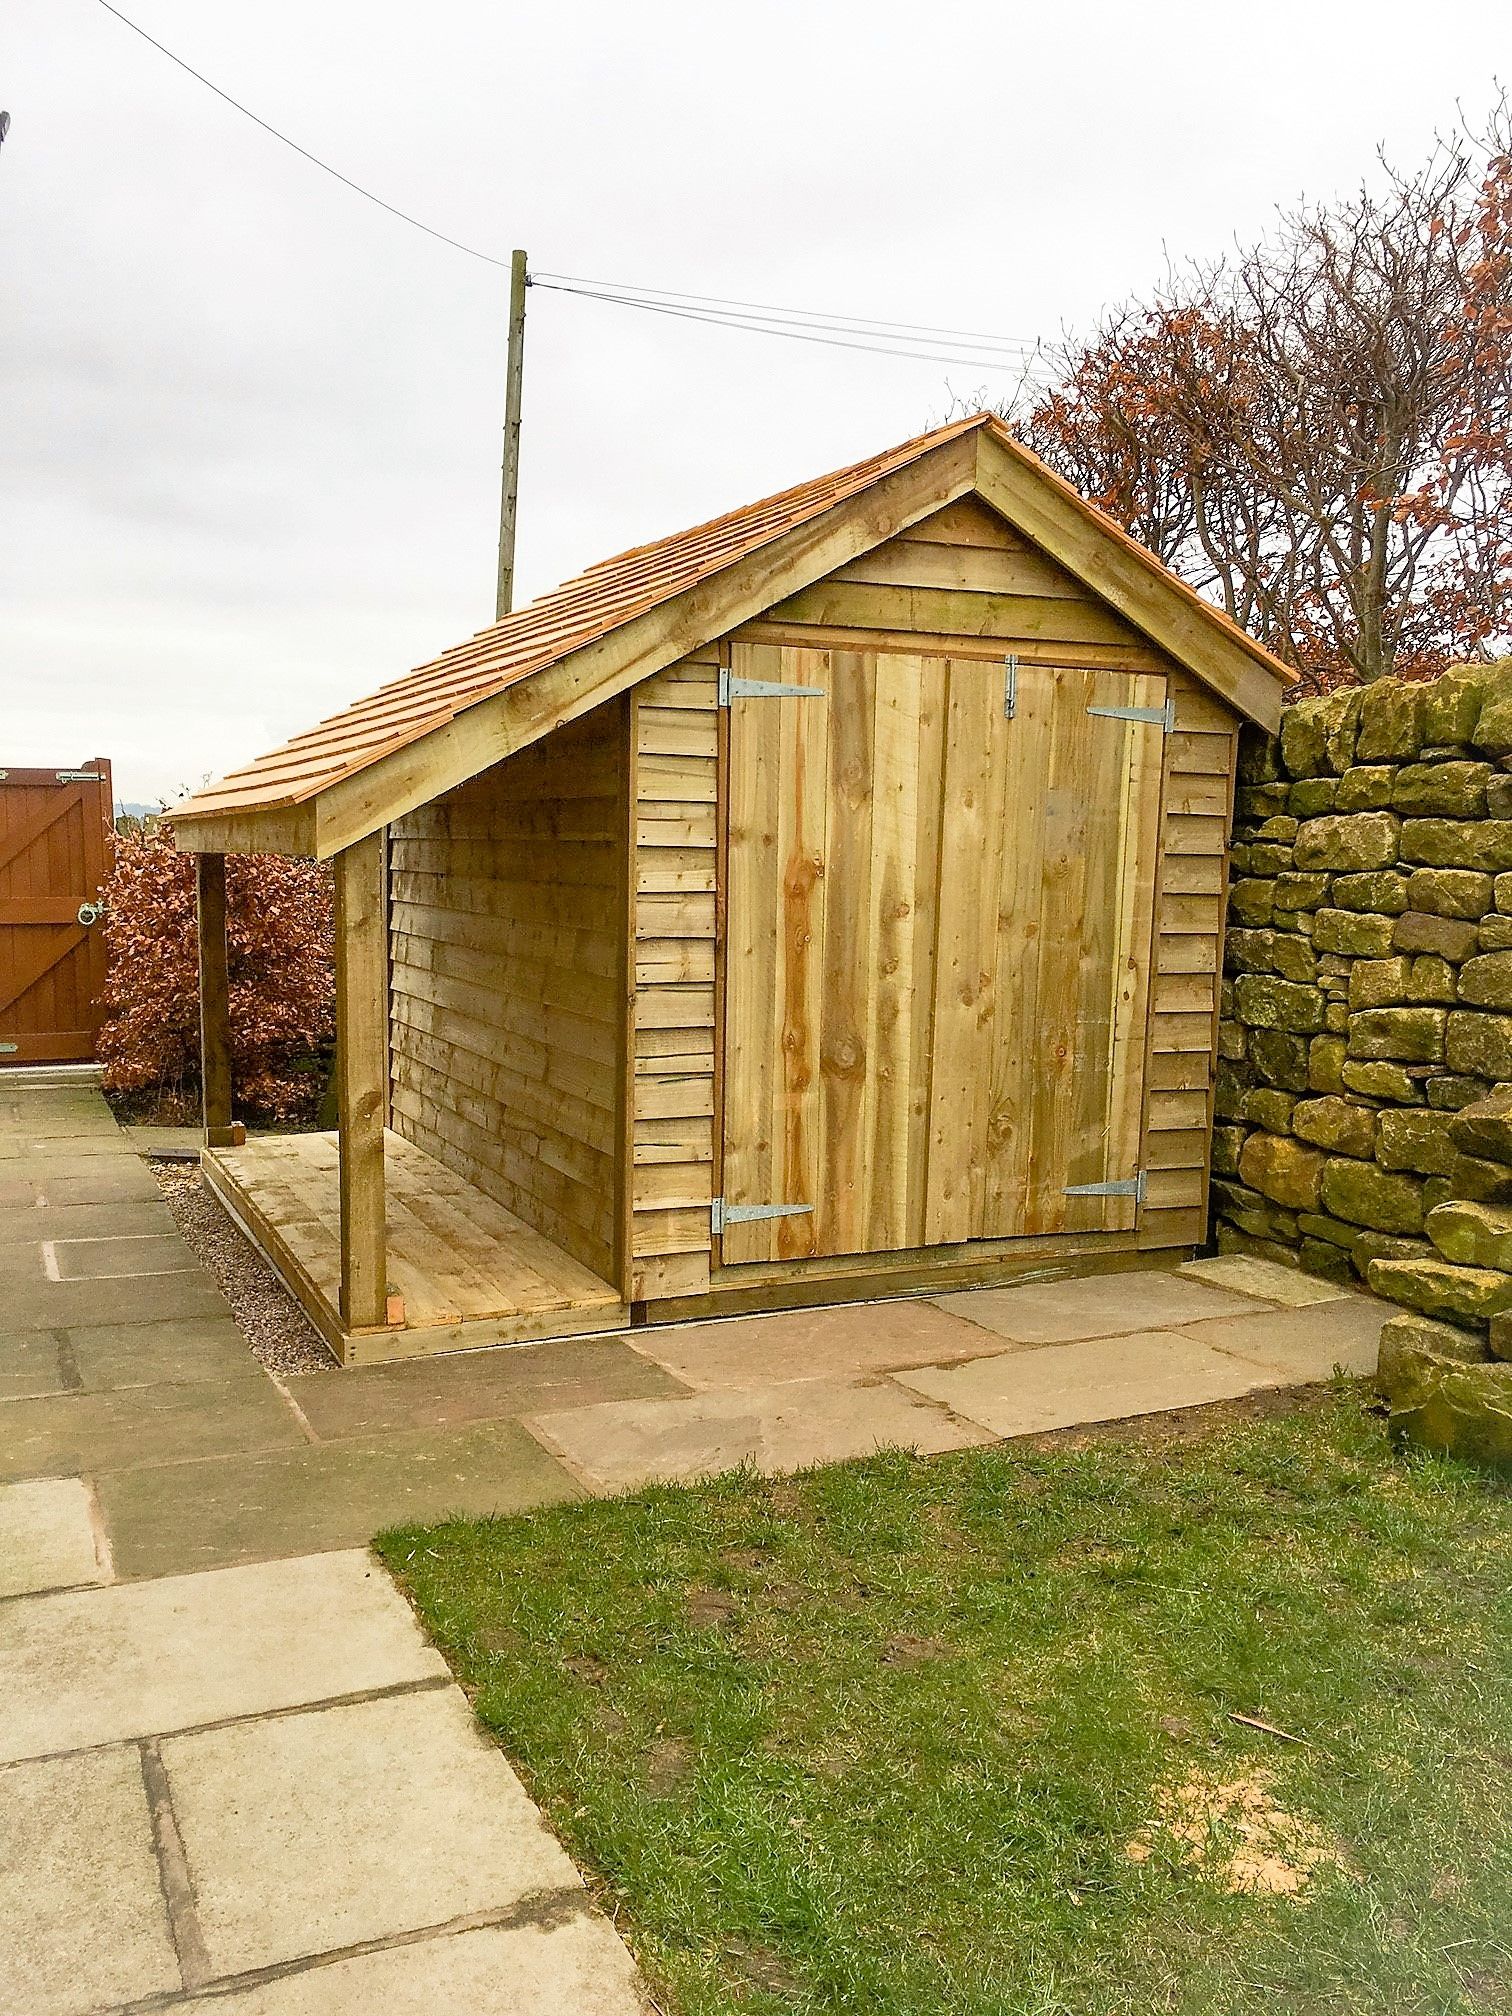 The Versatile Charm of Wooden Sheds